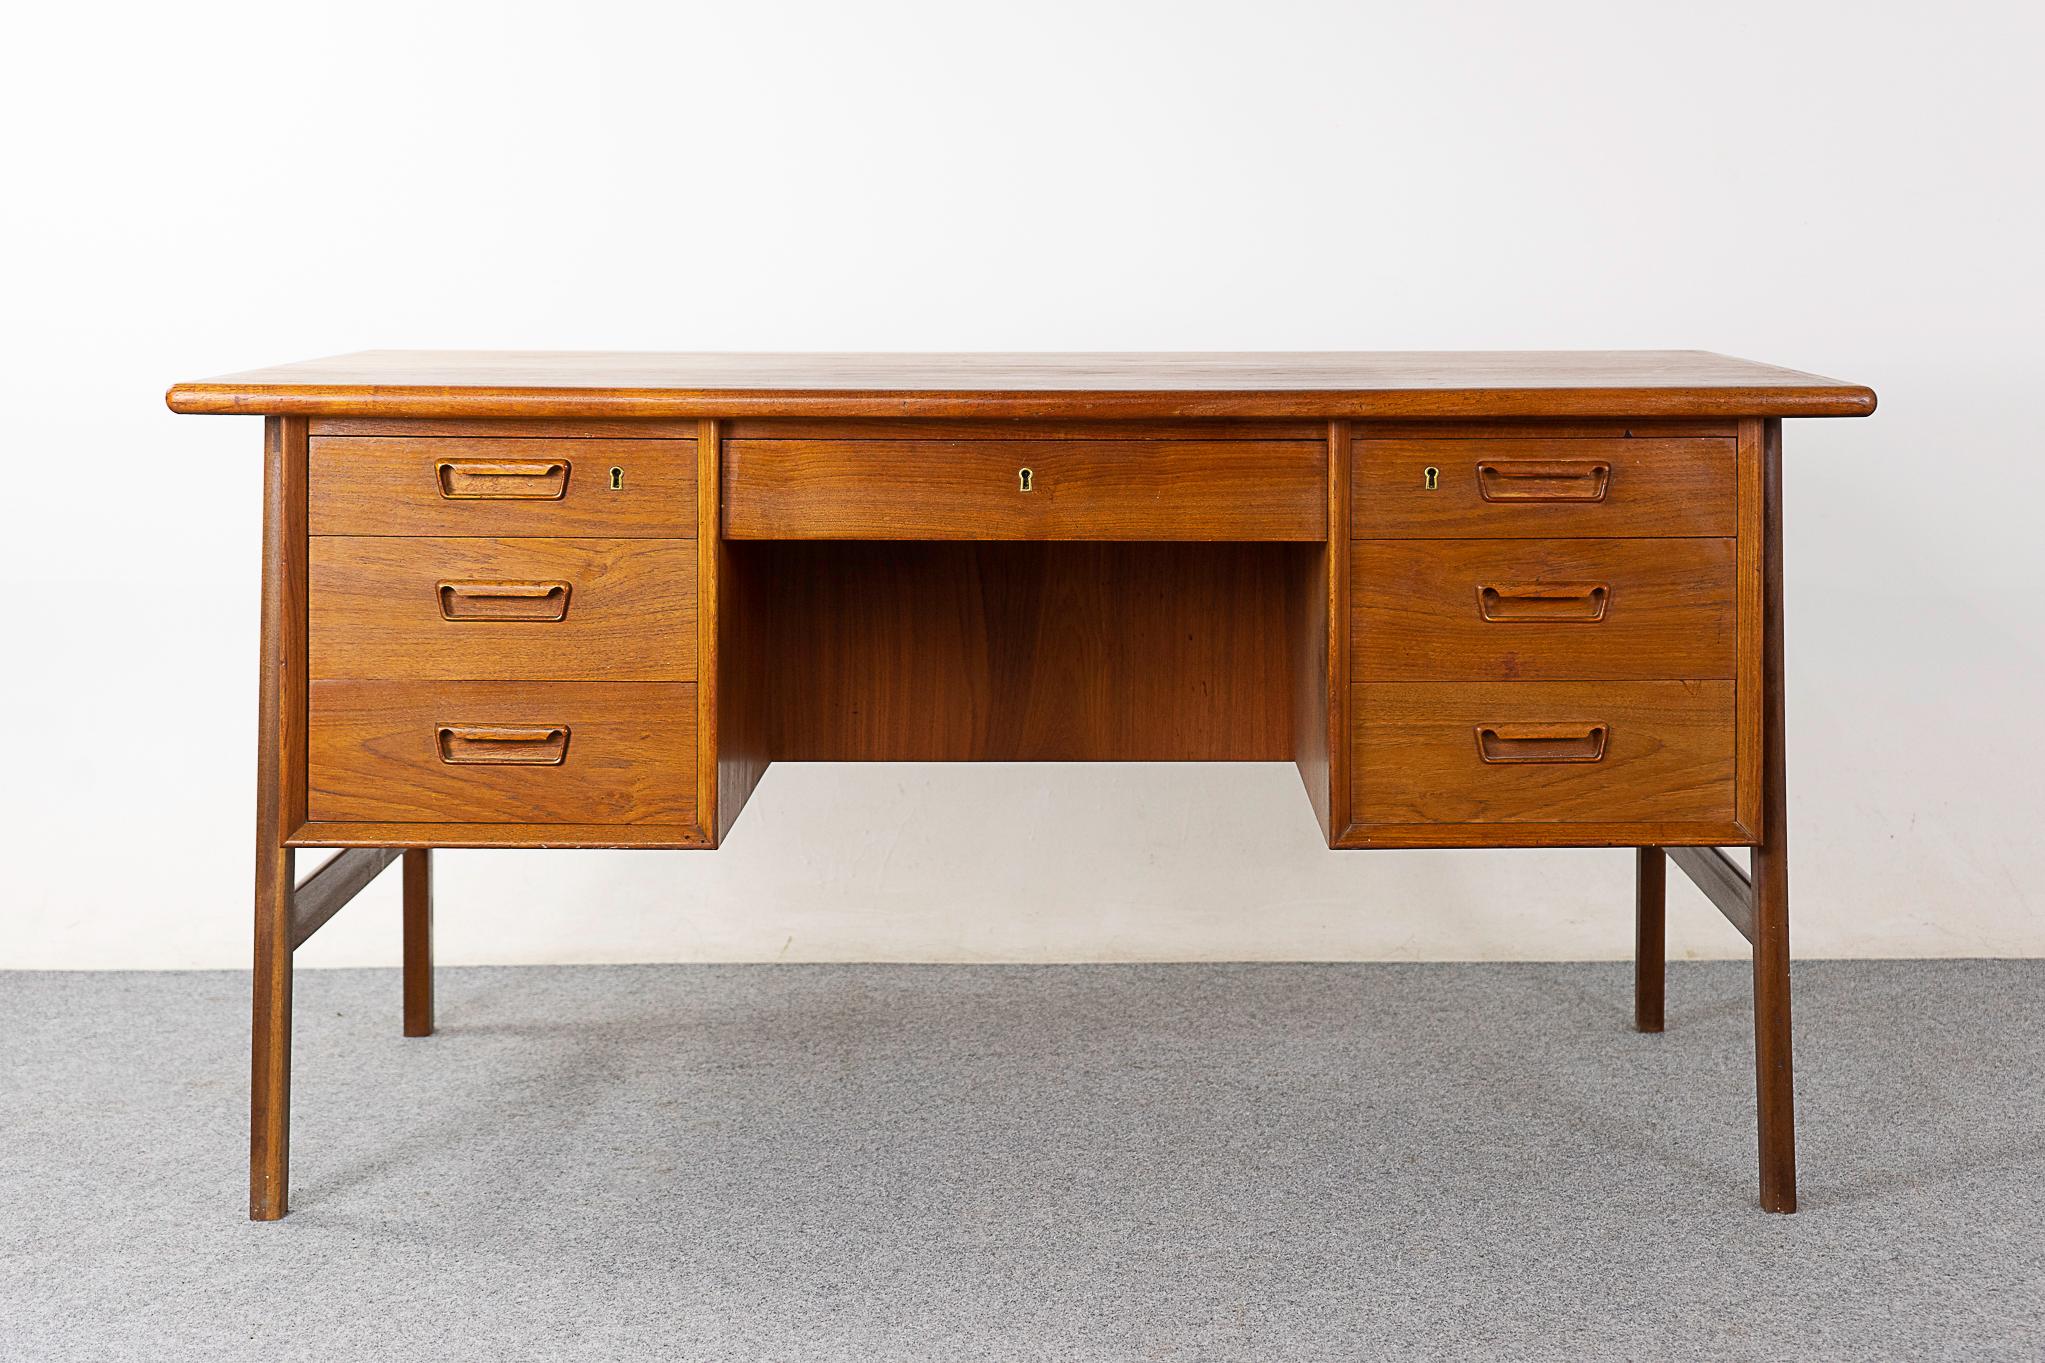 Teak Danish desk, circa 1960's. Robust work surface! Finished on both sides, if placed in the center of a room, it will look fantastic from every angle. Back side has a charming drop down bar with etched glass mirror and a built in bookcase with an